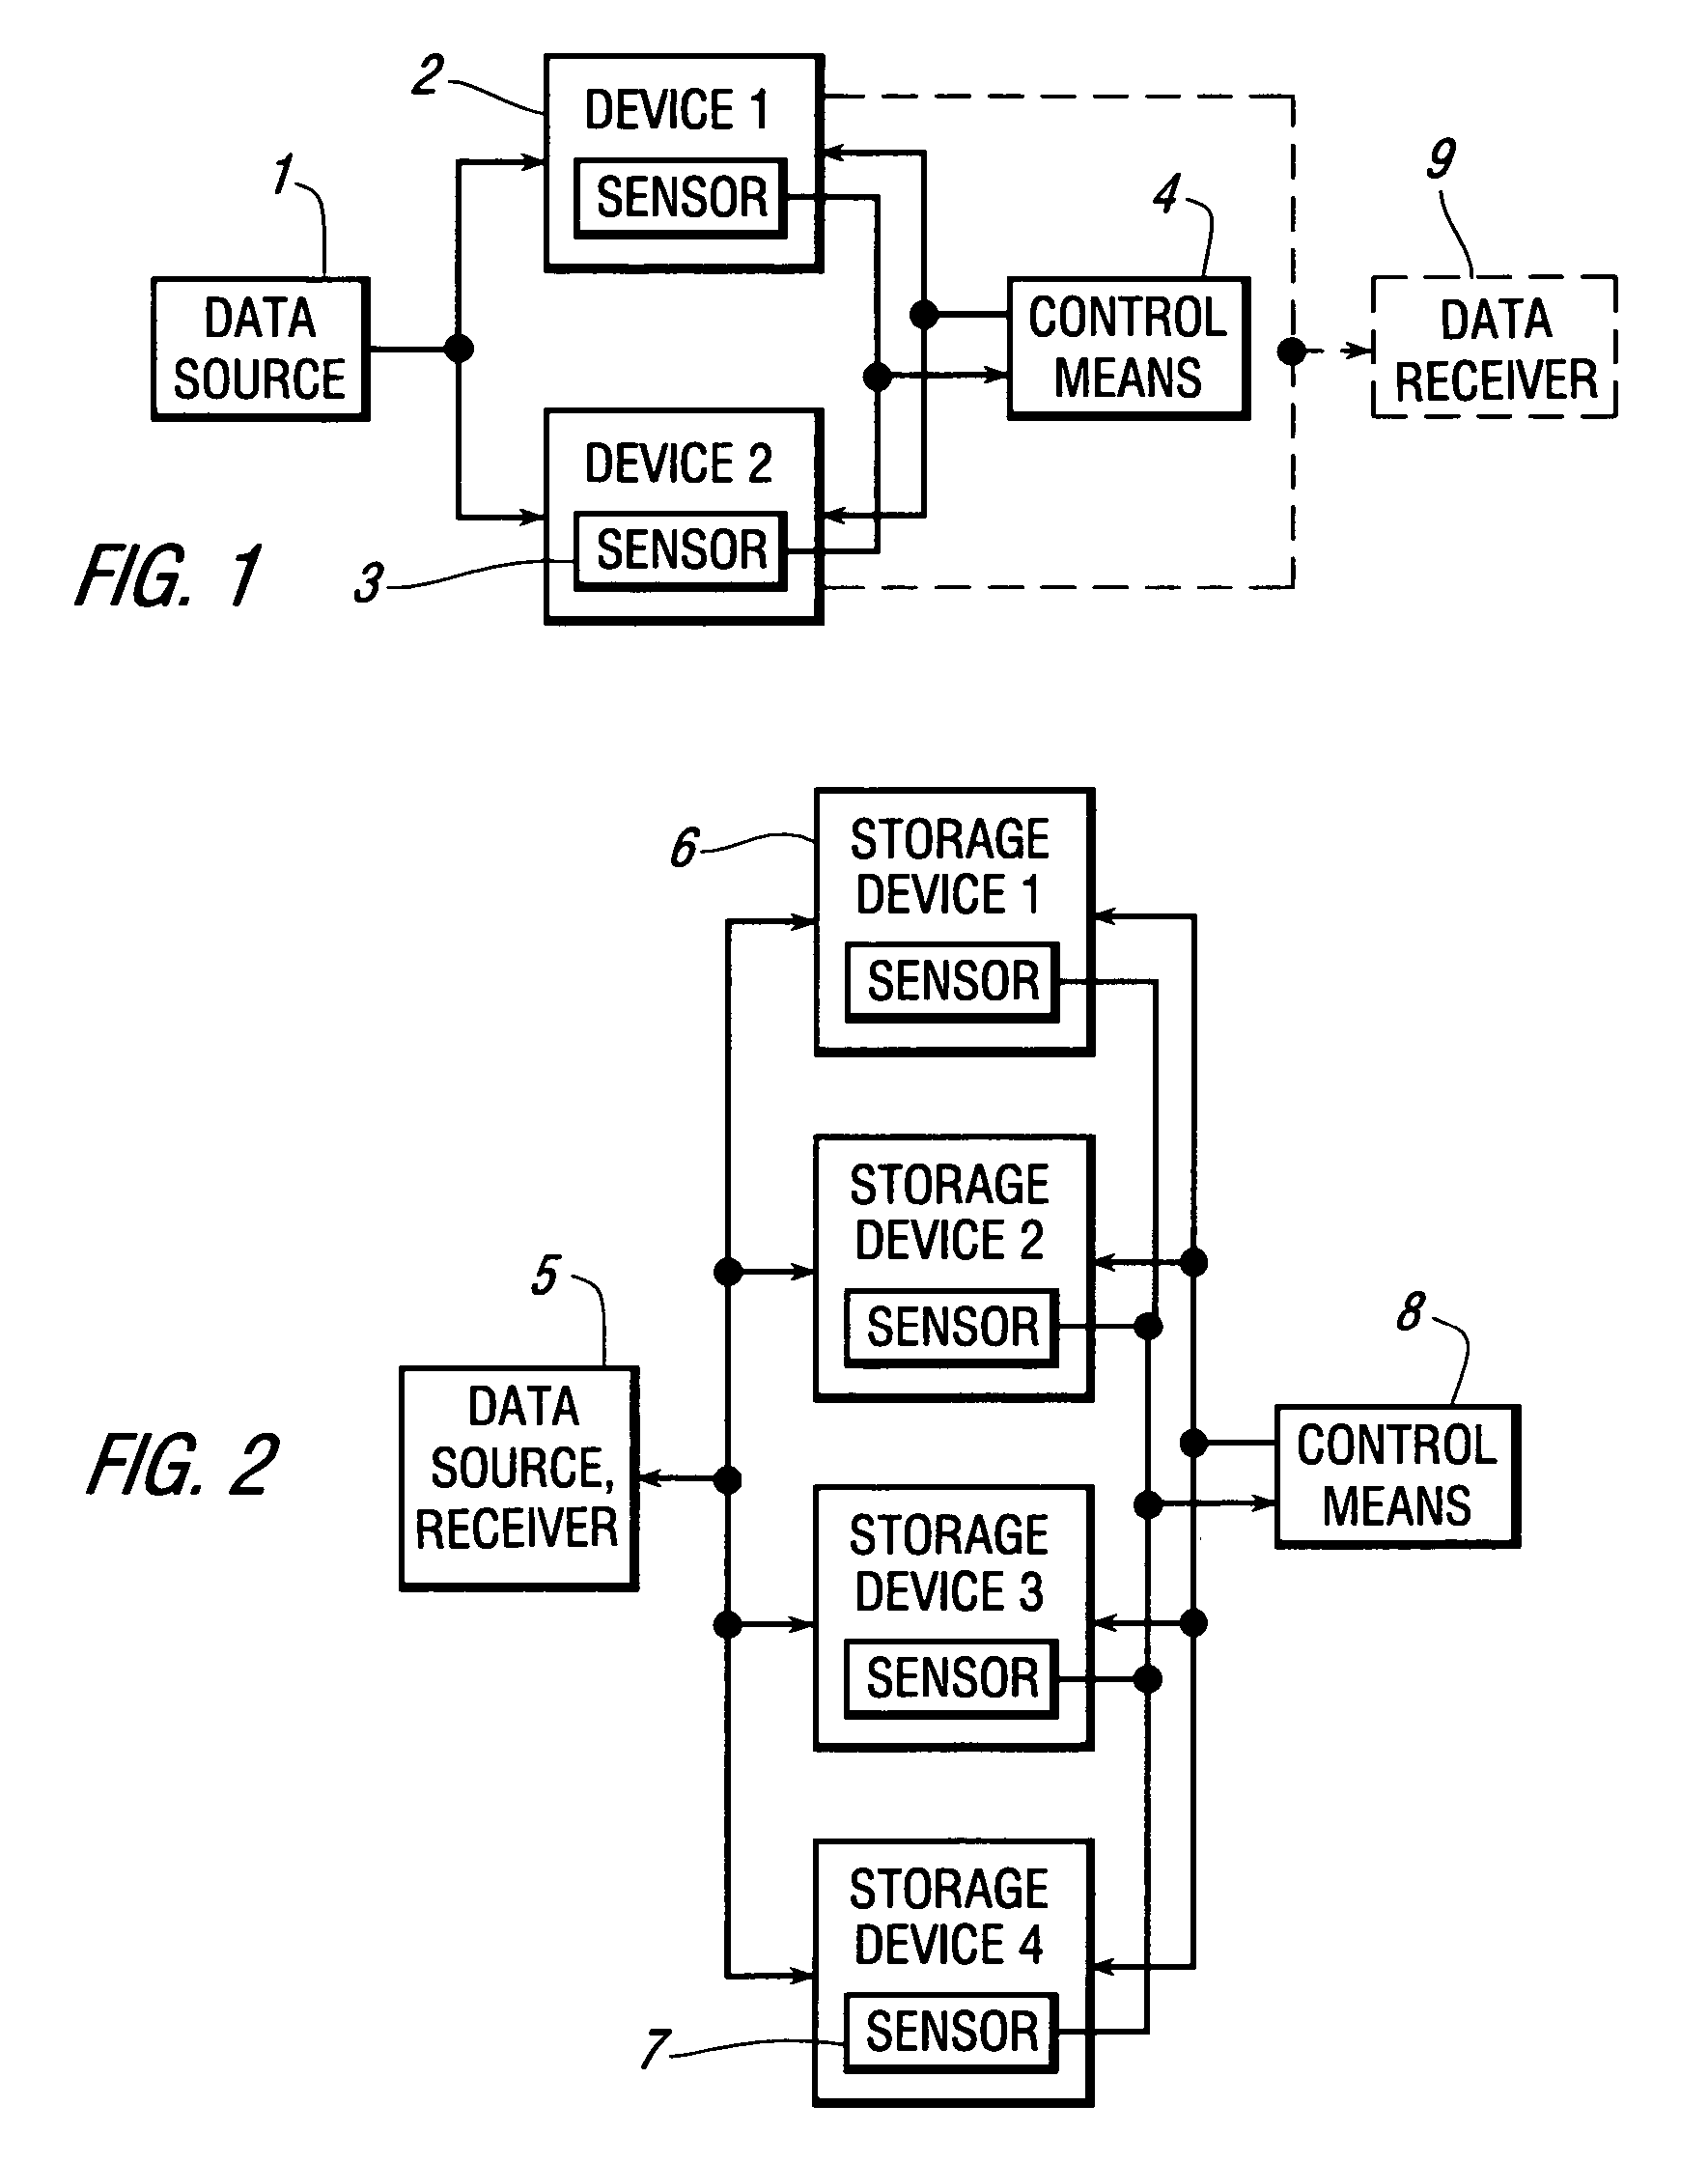 Apparatus and method for achieving thermal management through the allocation of redundant data processing devices